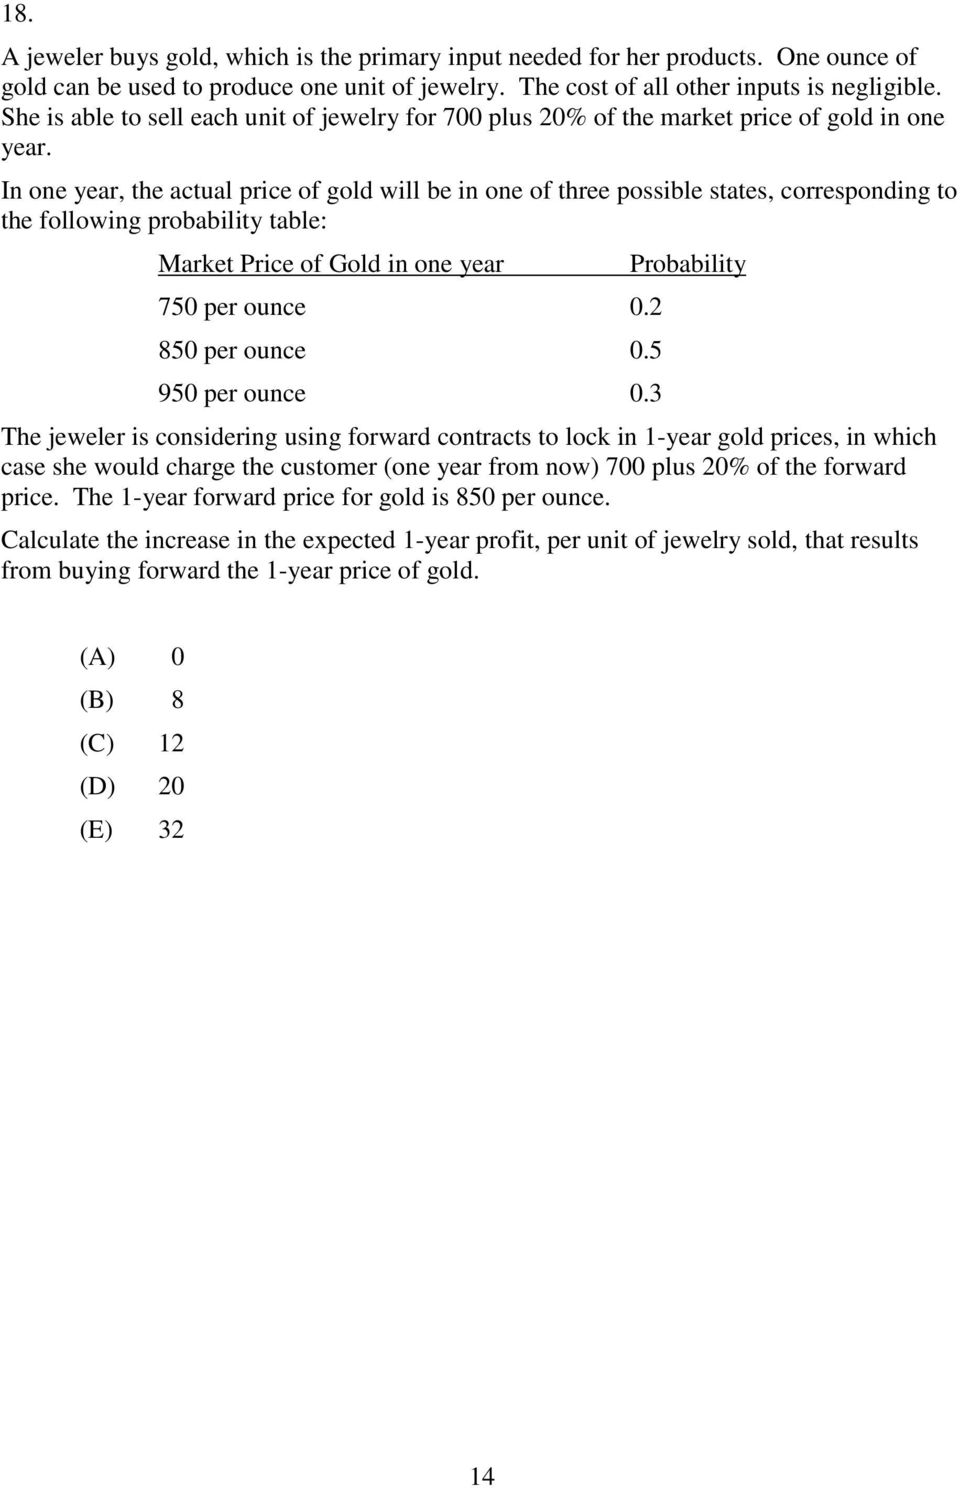 In one year, the actual price of gold will be in one of three possible states, corresponding to the following probability table: Market Price of Gold in one year 750 per ounce 0.2 850 per ounce 0.